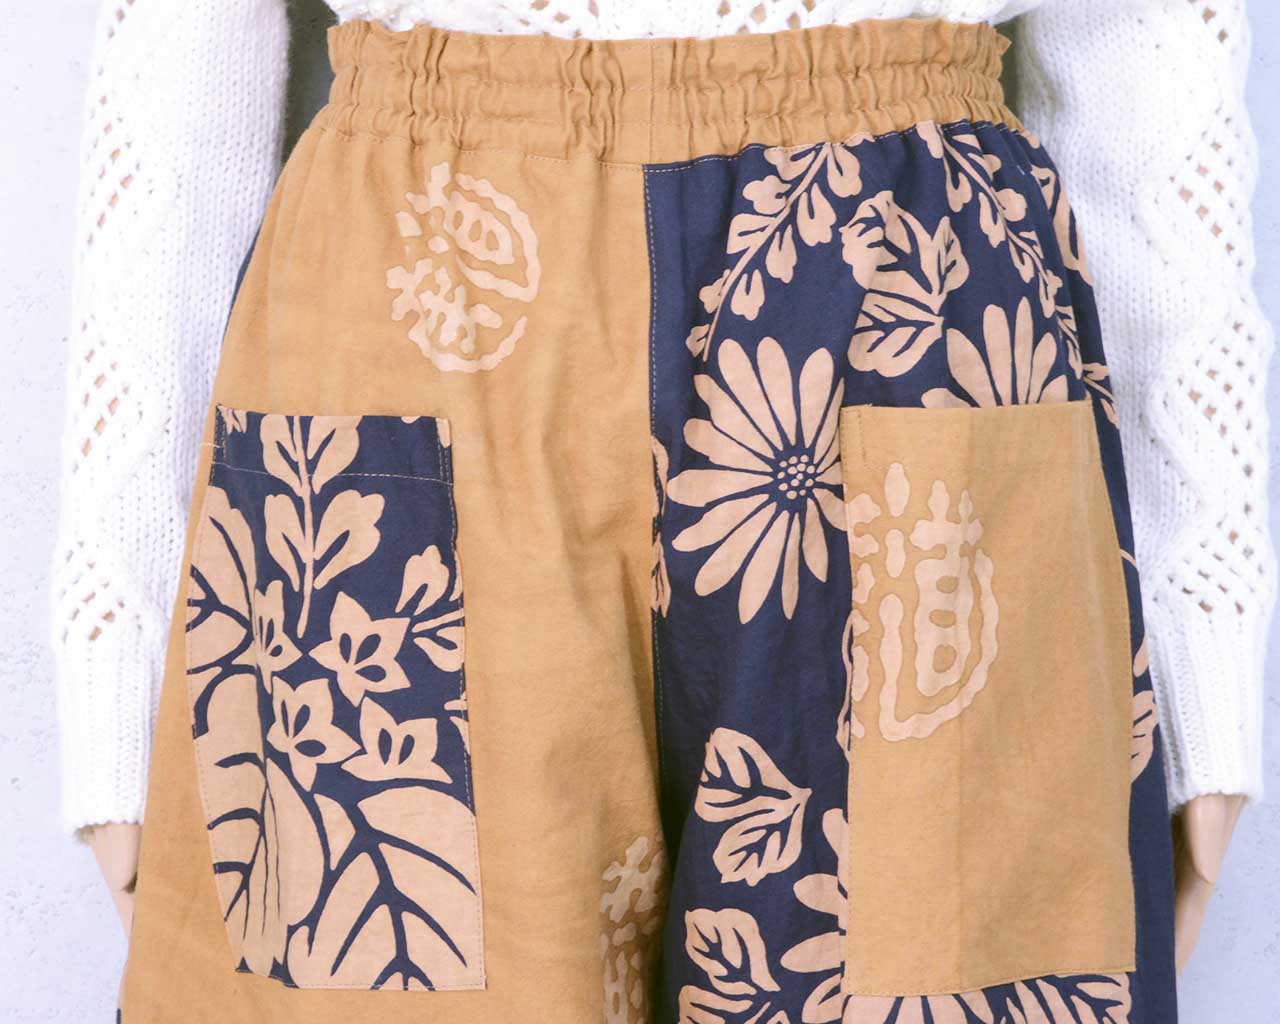 Persimmon-dyed pants made of tube-drawn cloth